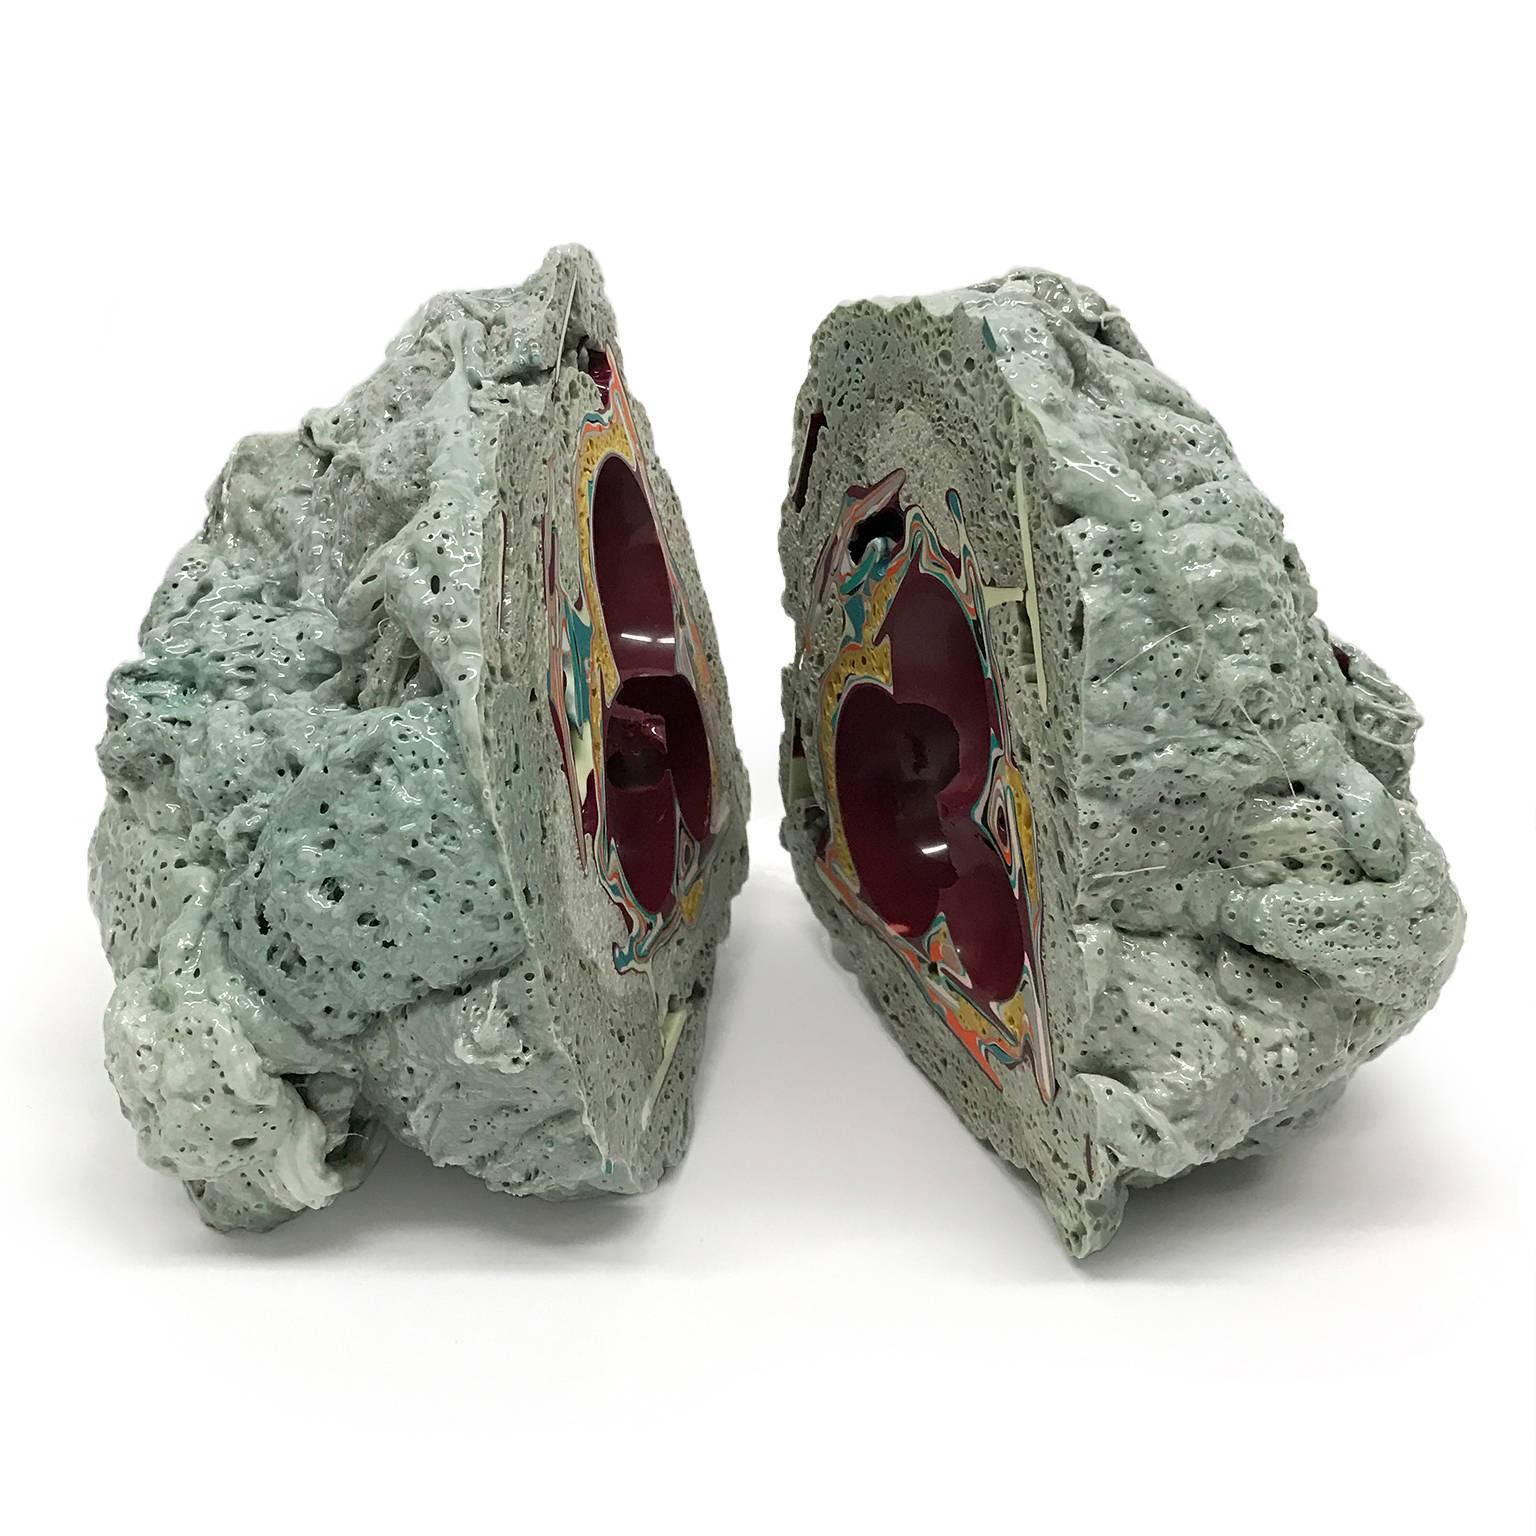 Unique Handmade Geode Sculpture in Burgundy and Sage Green In New Condition For Sale In Springfield, OR